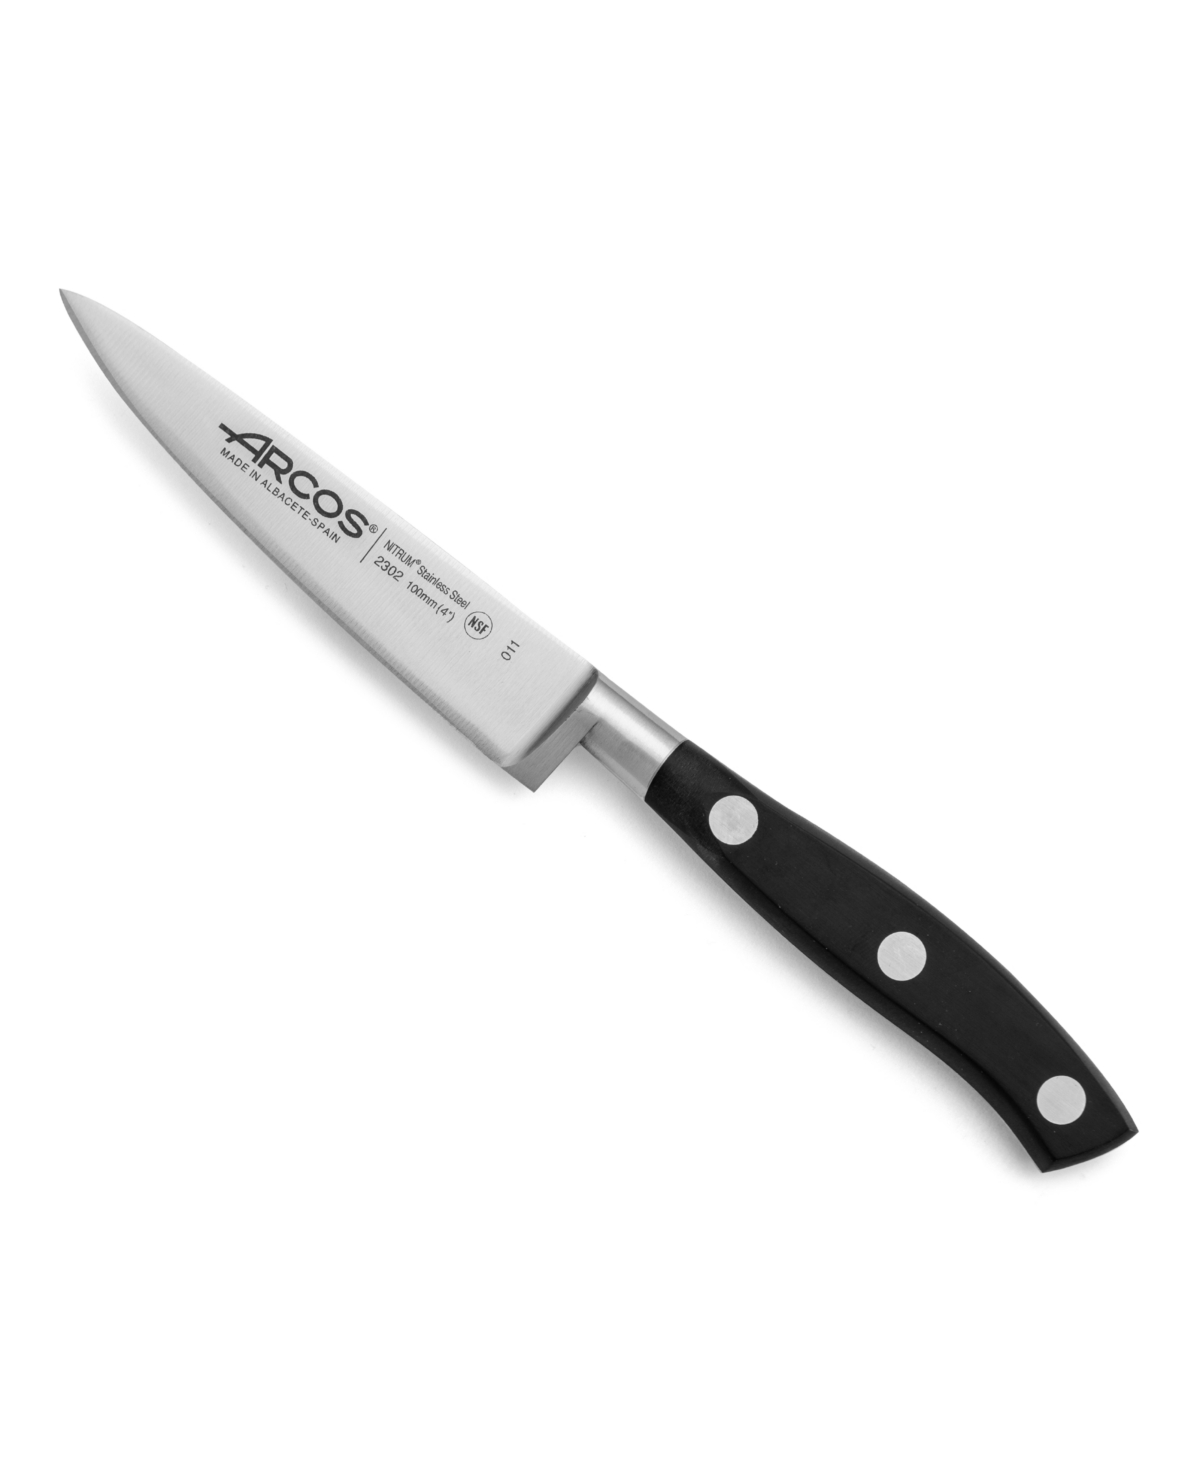 Arcos Riviera 4" Paring Knife Cutlery In Black